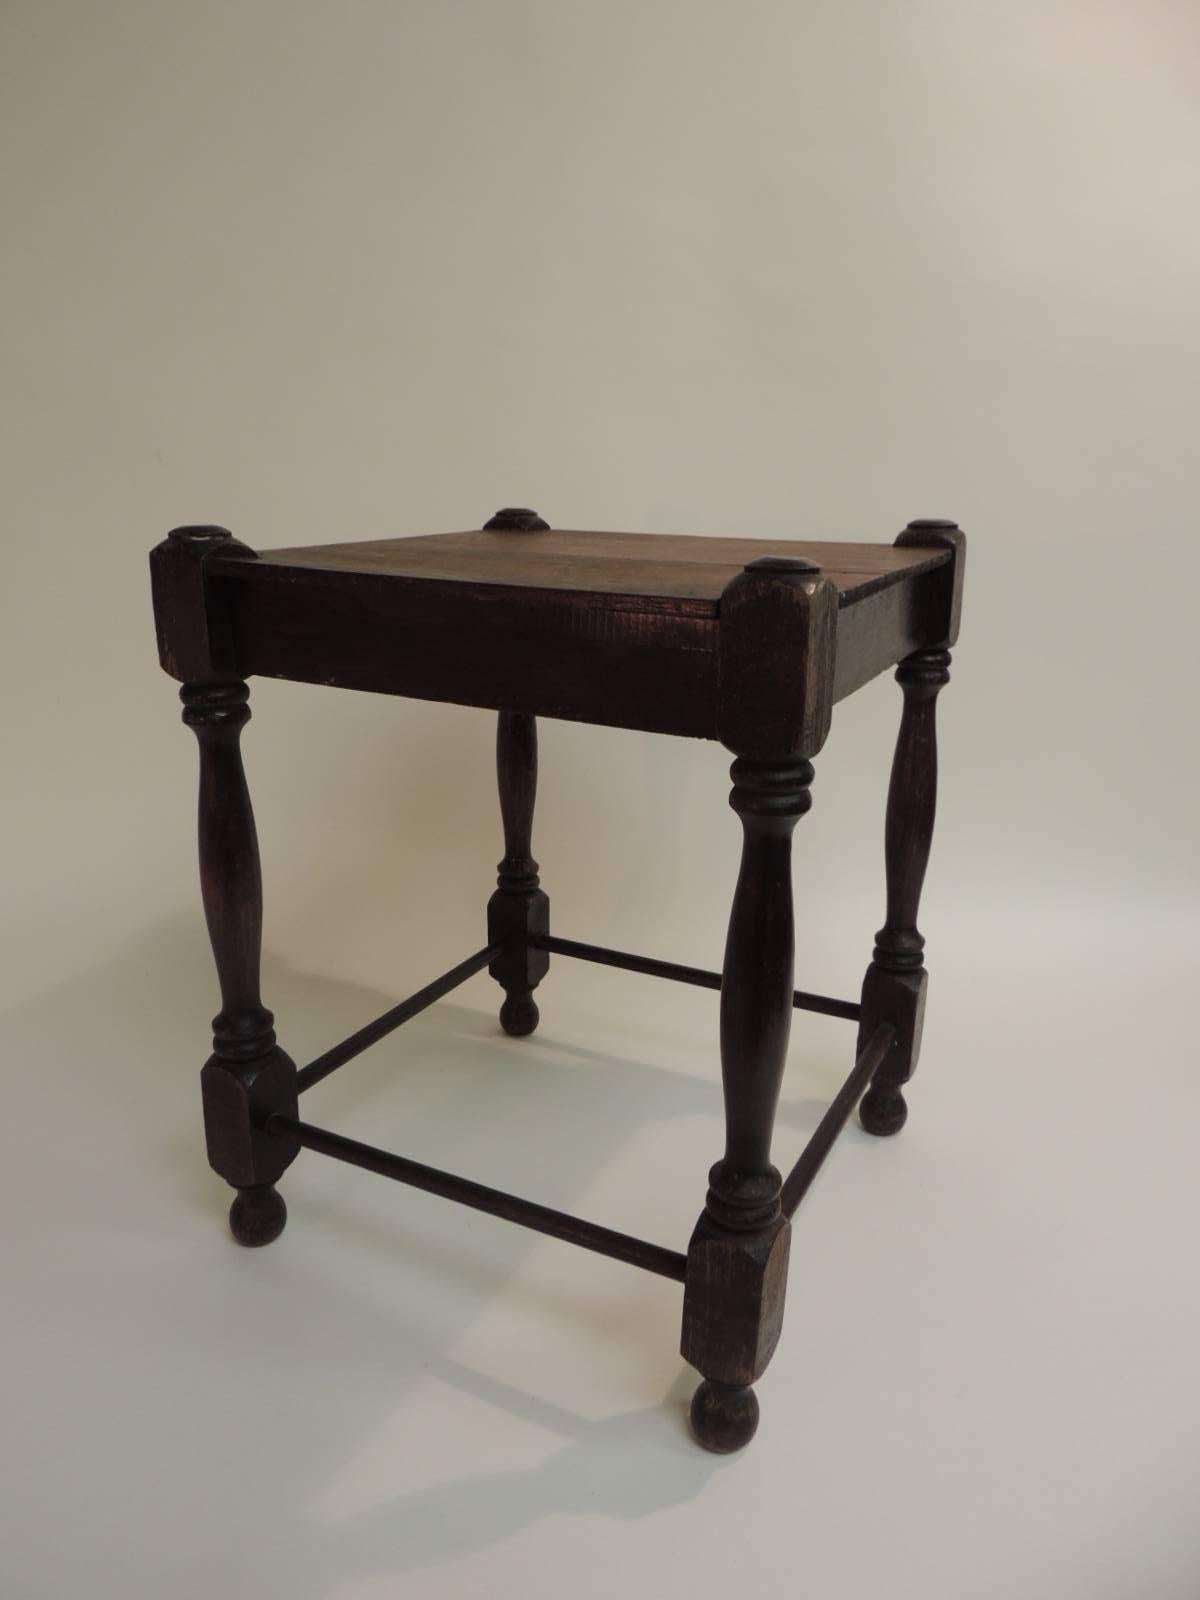 Offered by the Antique Textiles Galleries:

Antique square milking stool with turned wood legs. Rounded stretchers, has a wood top base ready for re-upholstery or a loose fabric cushion.
Size: 12 x 12 x 14.5 H.


 